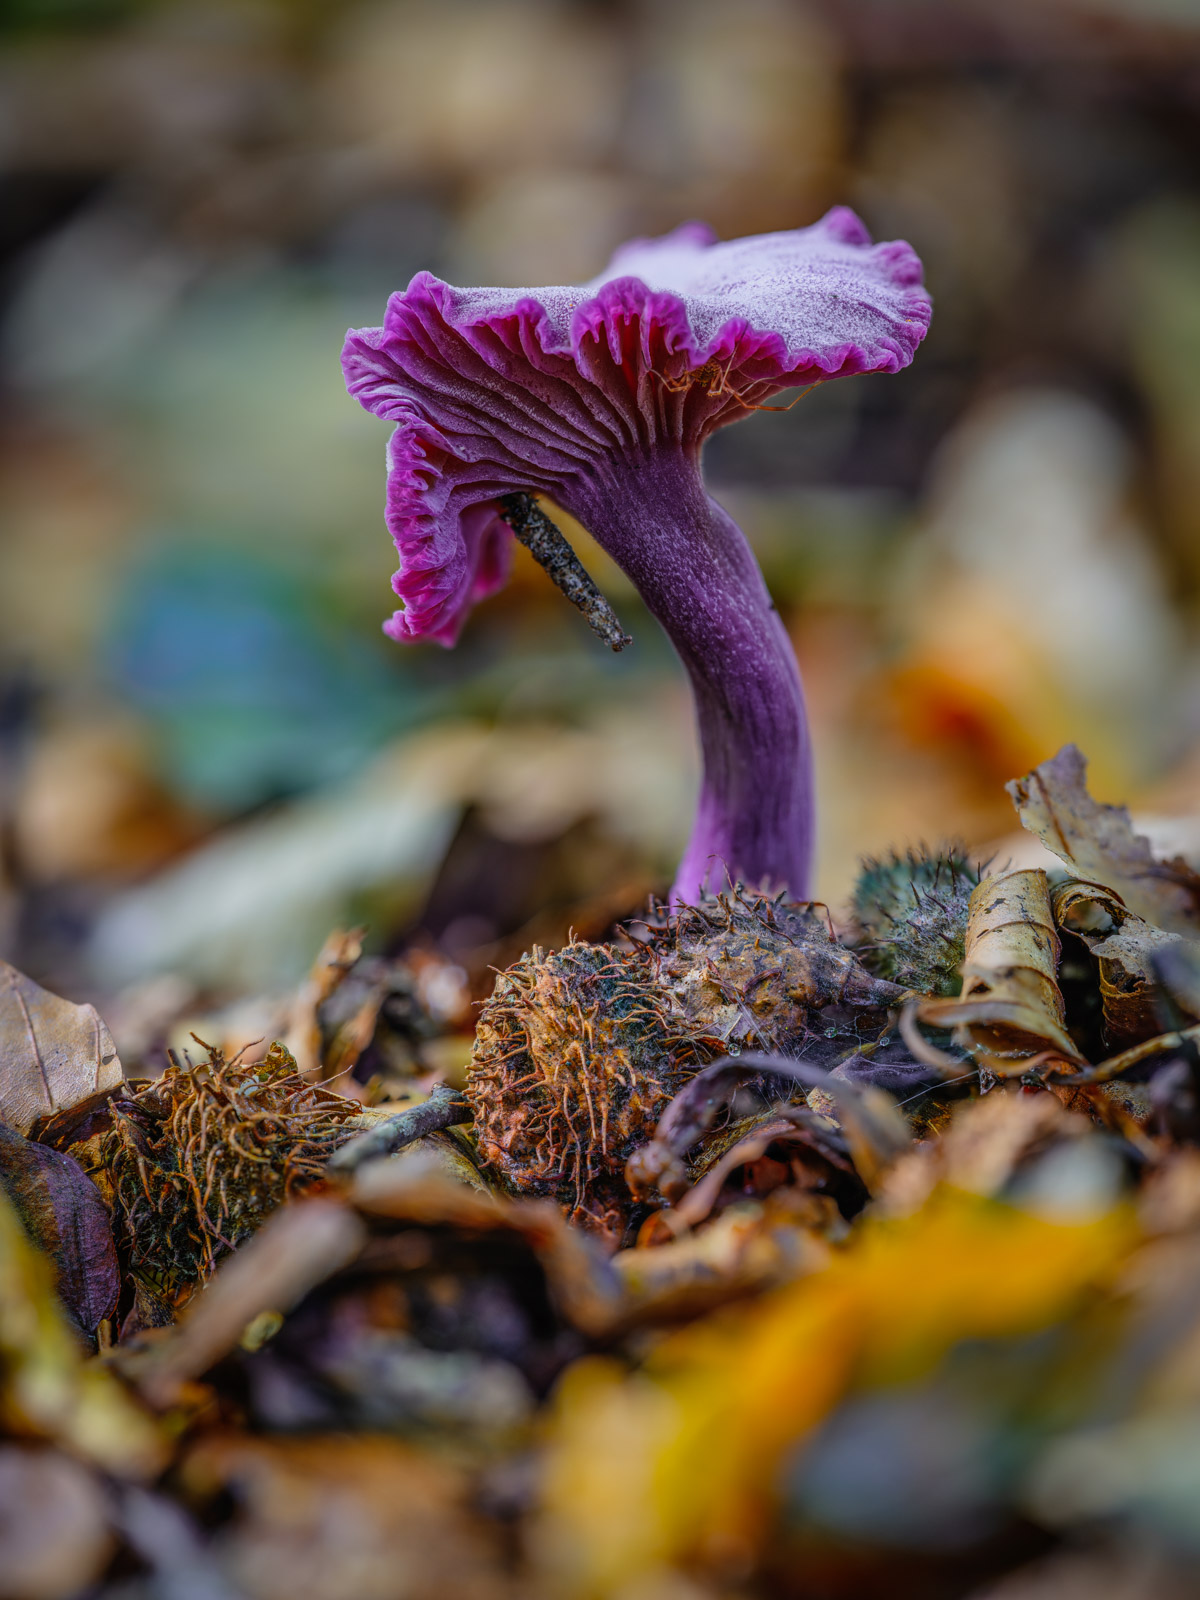 Amethyst deceiver (Laccaria amethystina) in the Teutoburg Forest in late September 2021 (Bielefeld, Germany).